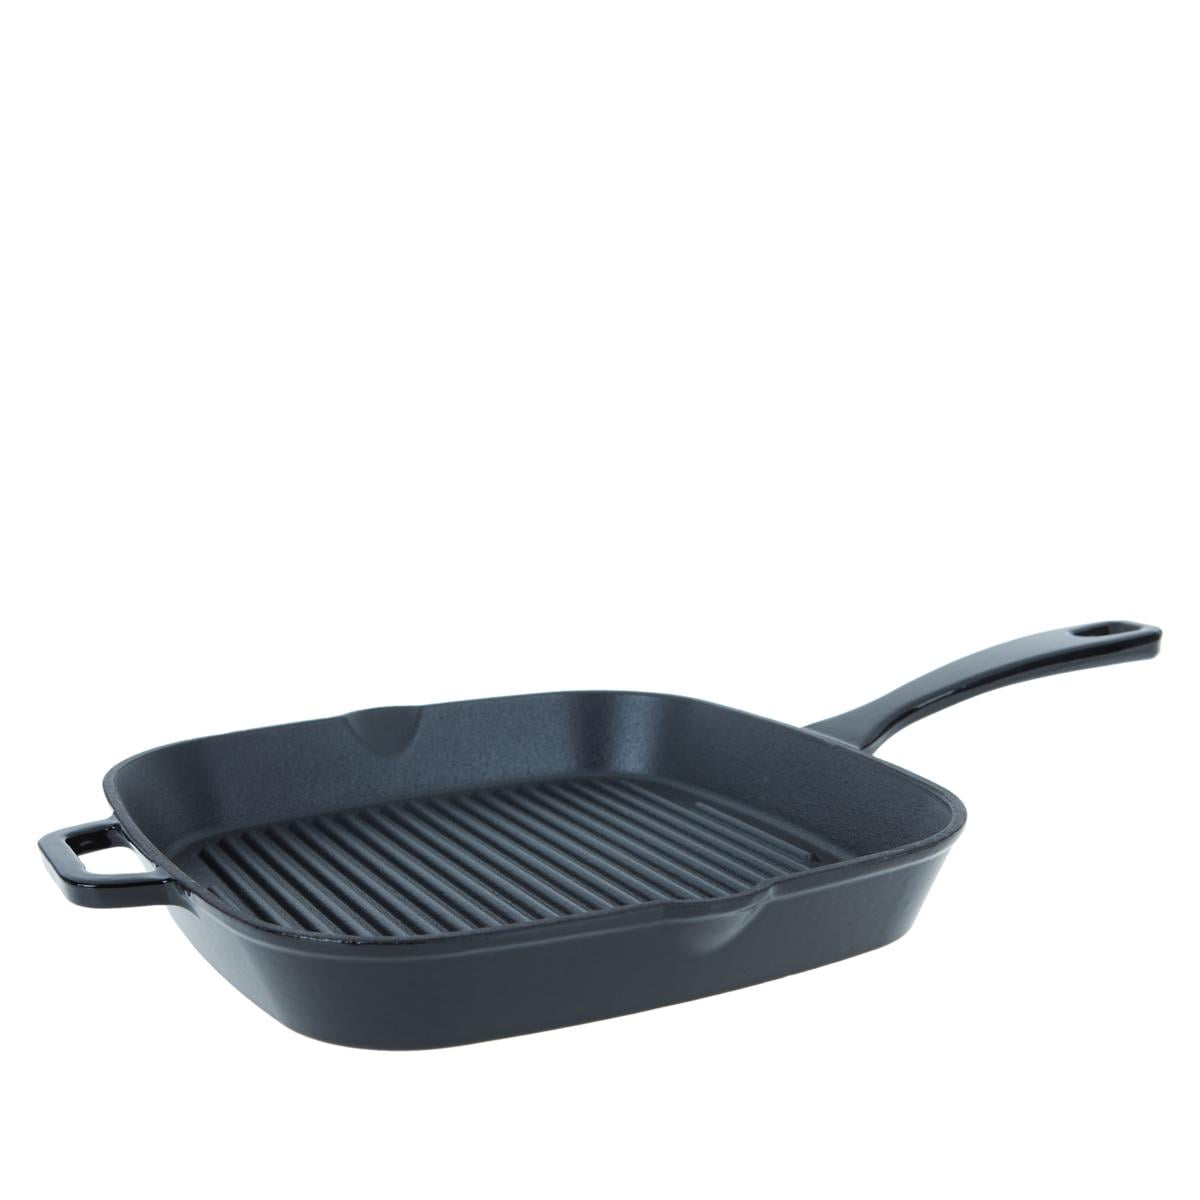  Cast Iron Grill Pan, Large Capacity Quadrate Steak Bacon Pan,  Non Stick and Double Outlet Stove Top Grill Pan with Handle, Multifunction  Frying Pan for Home, Camping, Panic, Restaurant(26cm): Home 